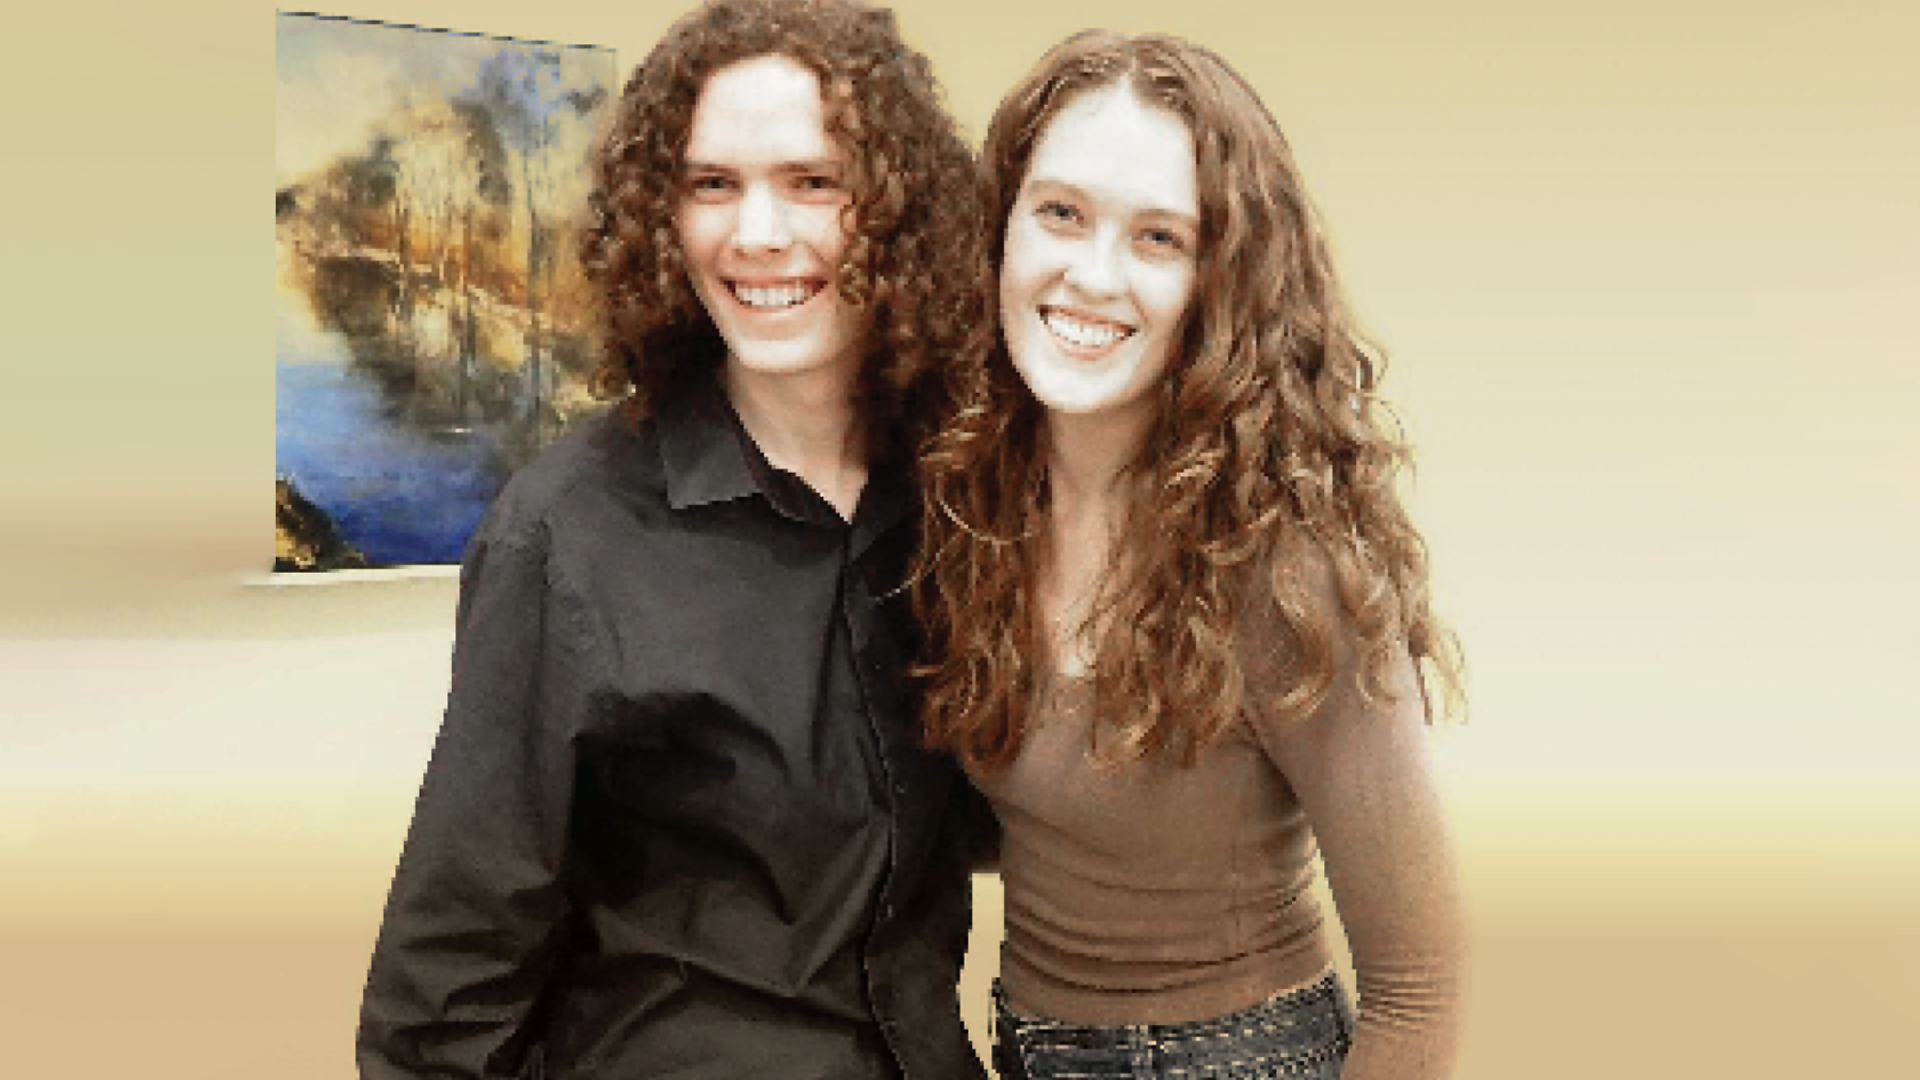 a young man and young woman, both curly-haired red-heads, who are musicians